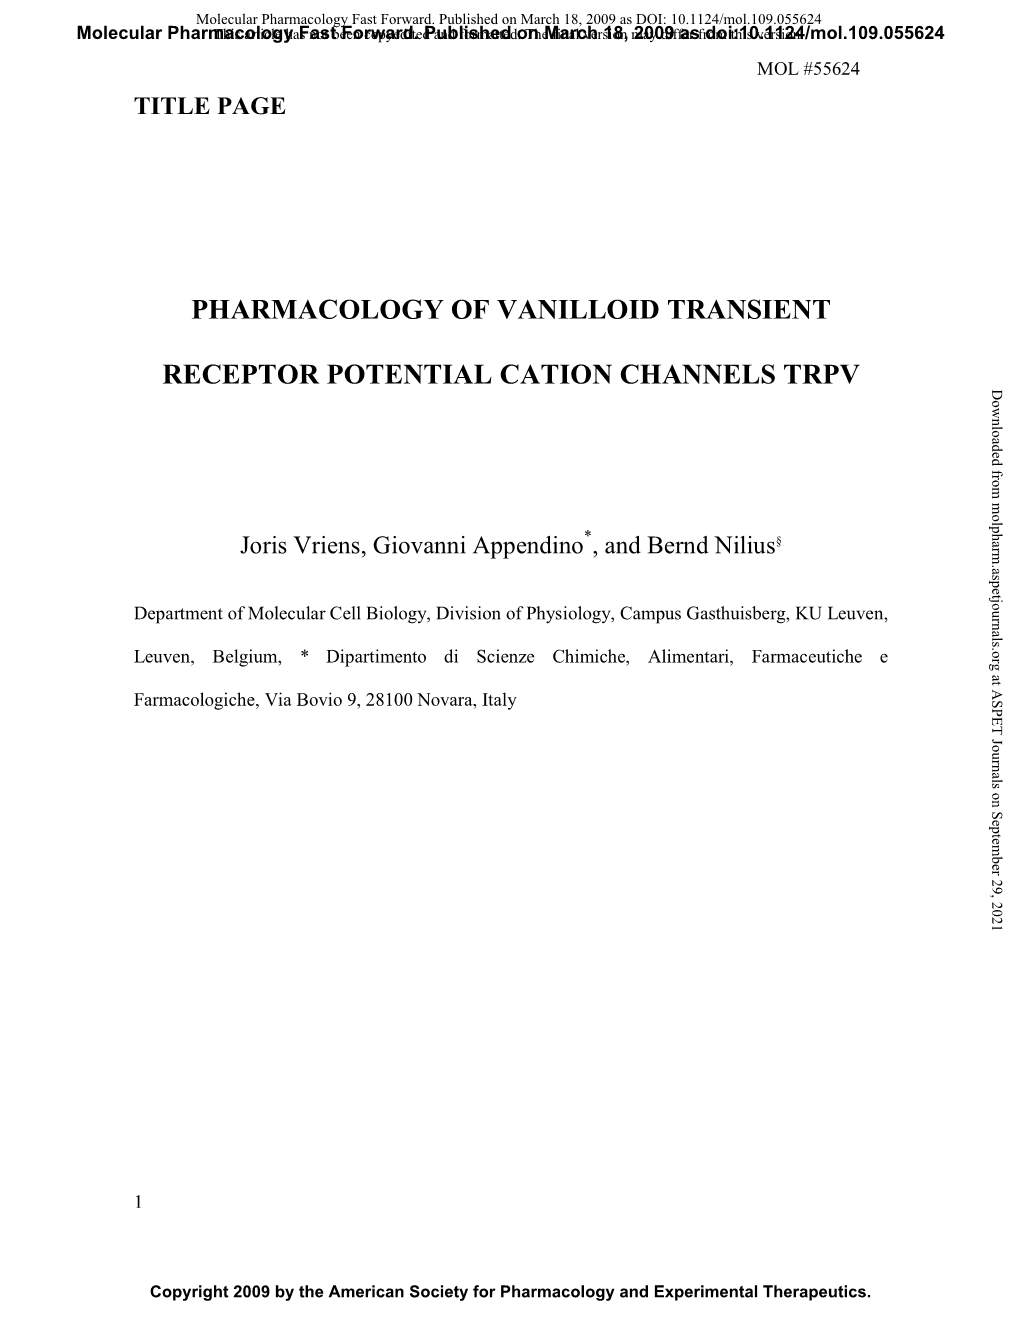 Pharmacology of Vanilloid Transient Receptor